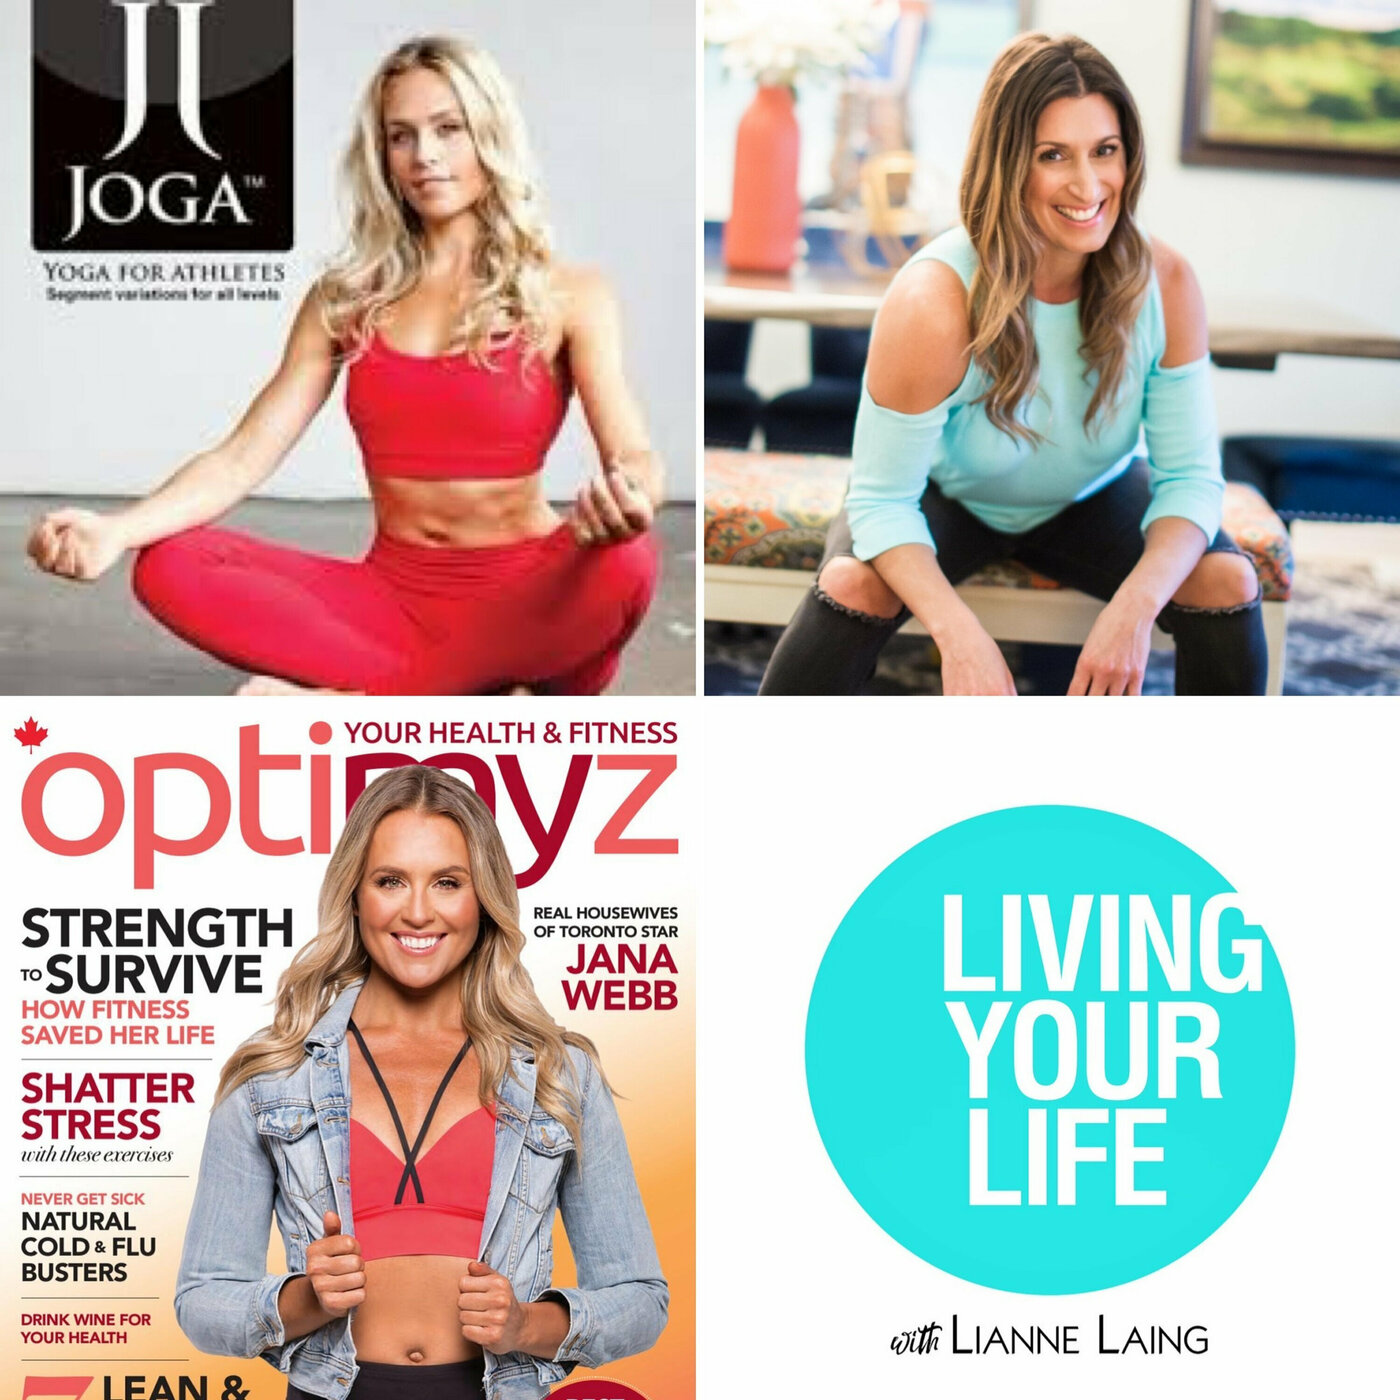 One Breath,  One Step At A Time; JOGA's Jana Webb On Survival & Triumph